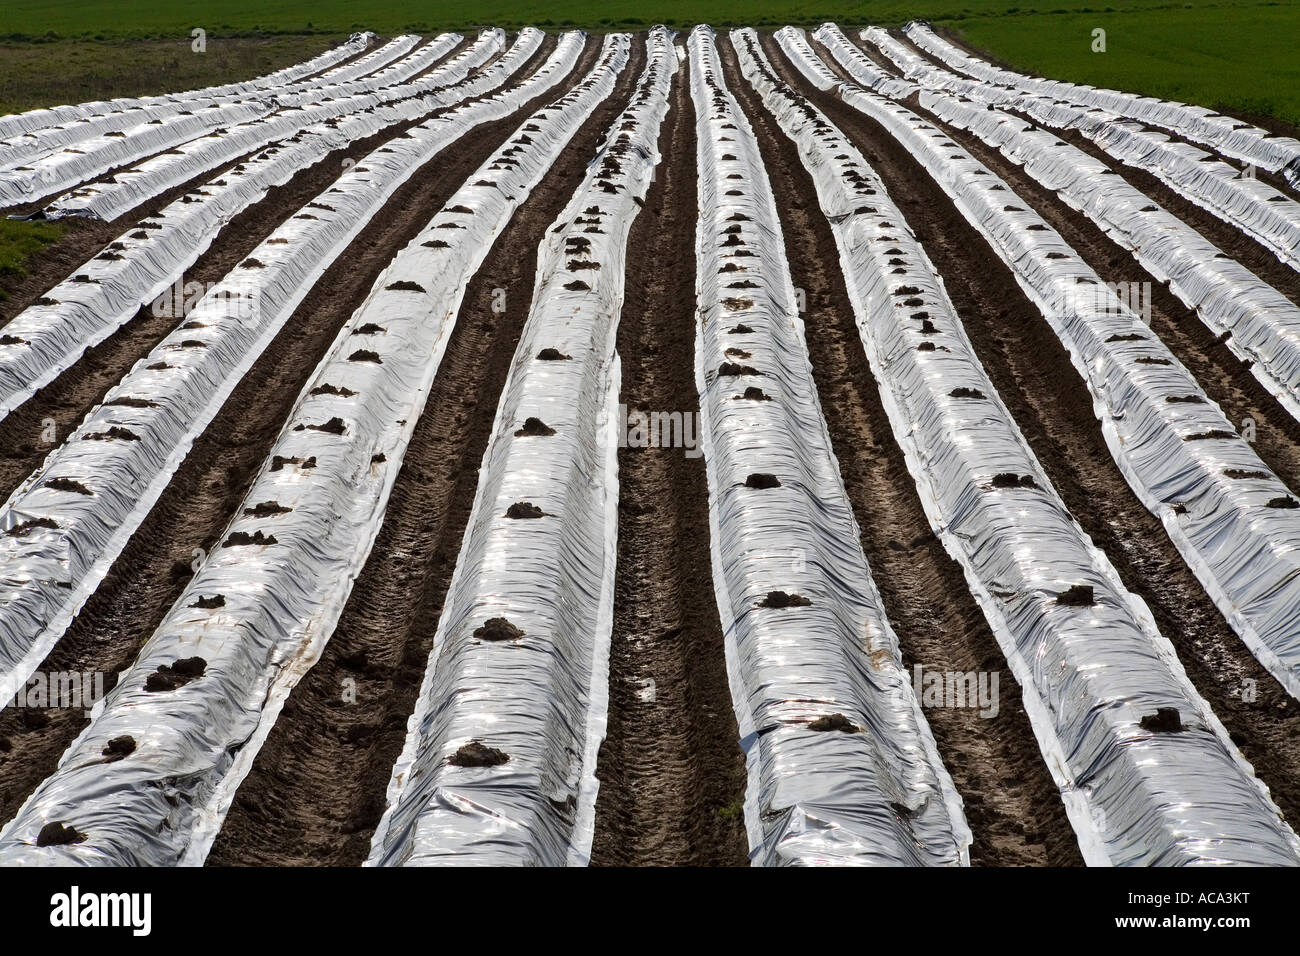 Asparagus field covered with plastic, Lower Rhineland, Germany Stock Photo